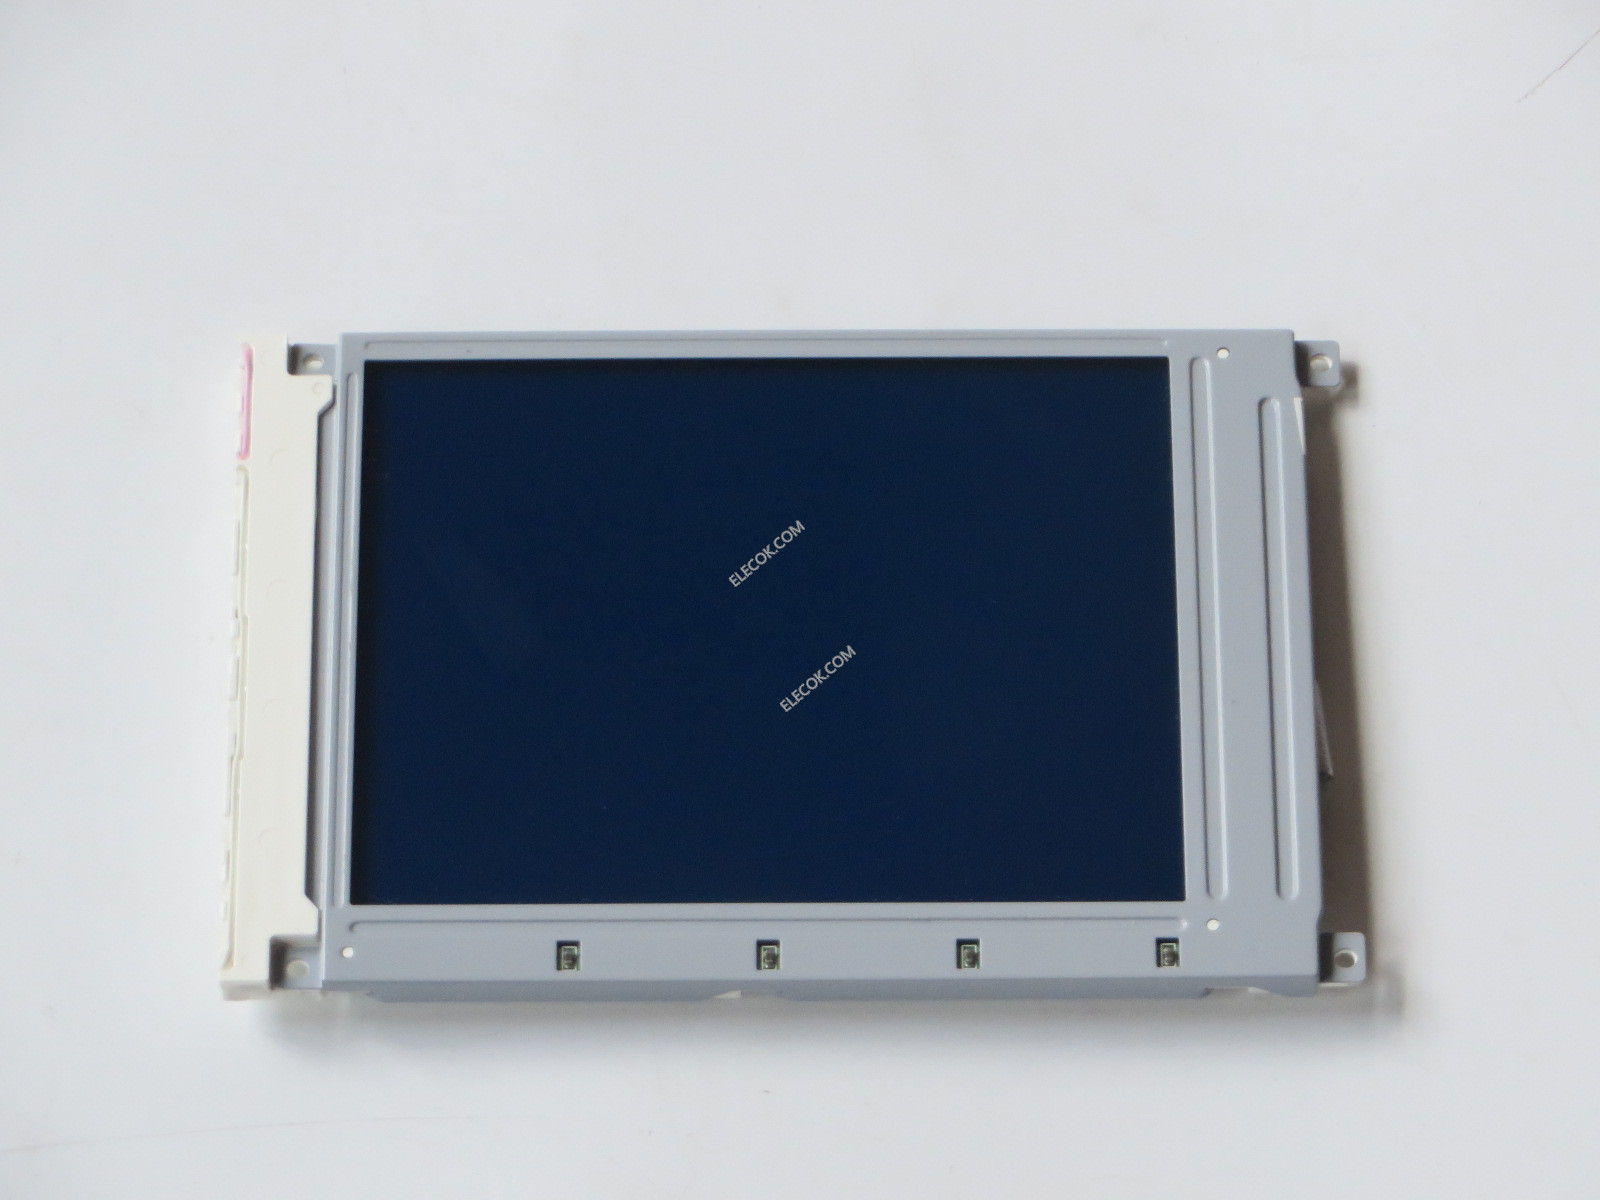 1PC Display LSUBL6291A a-Si STN-LCD Panel 5.7" 320*240 for Alps 